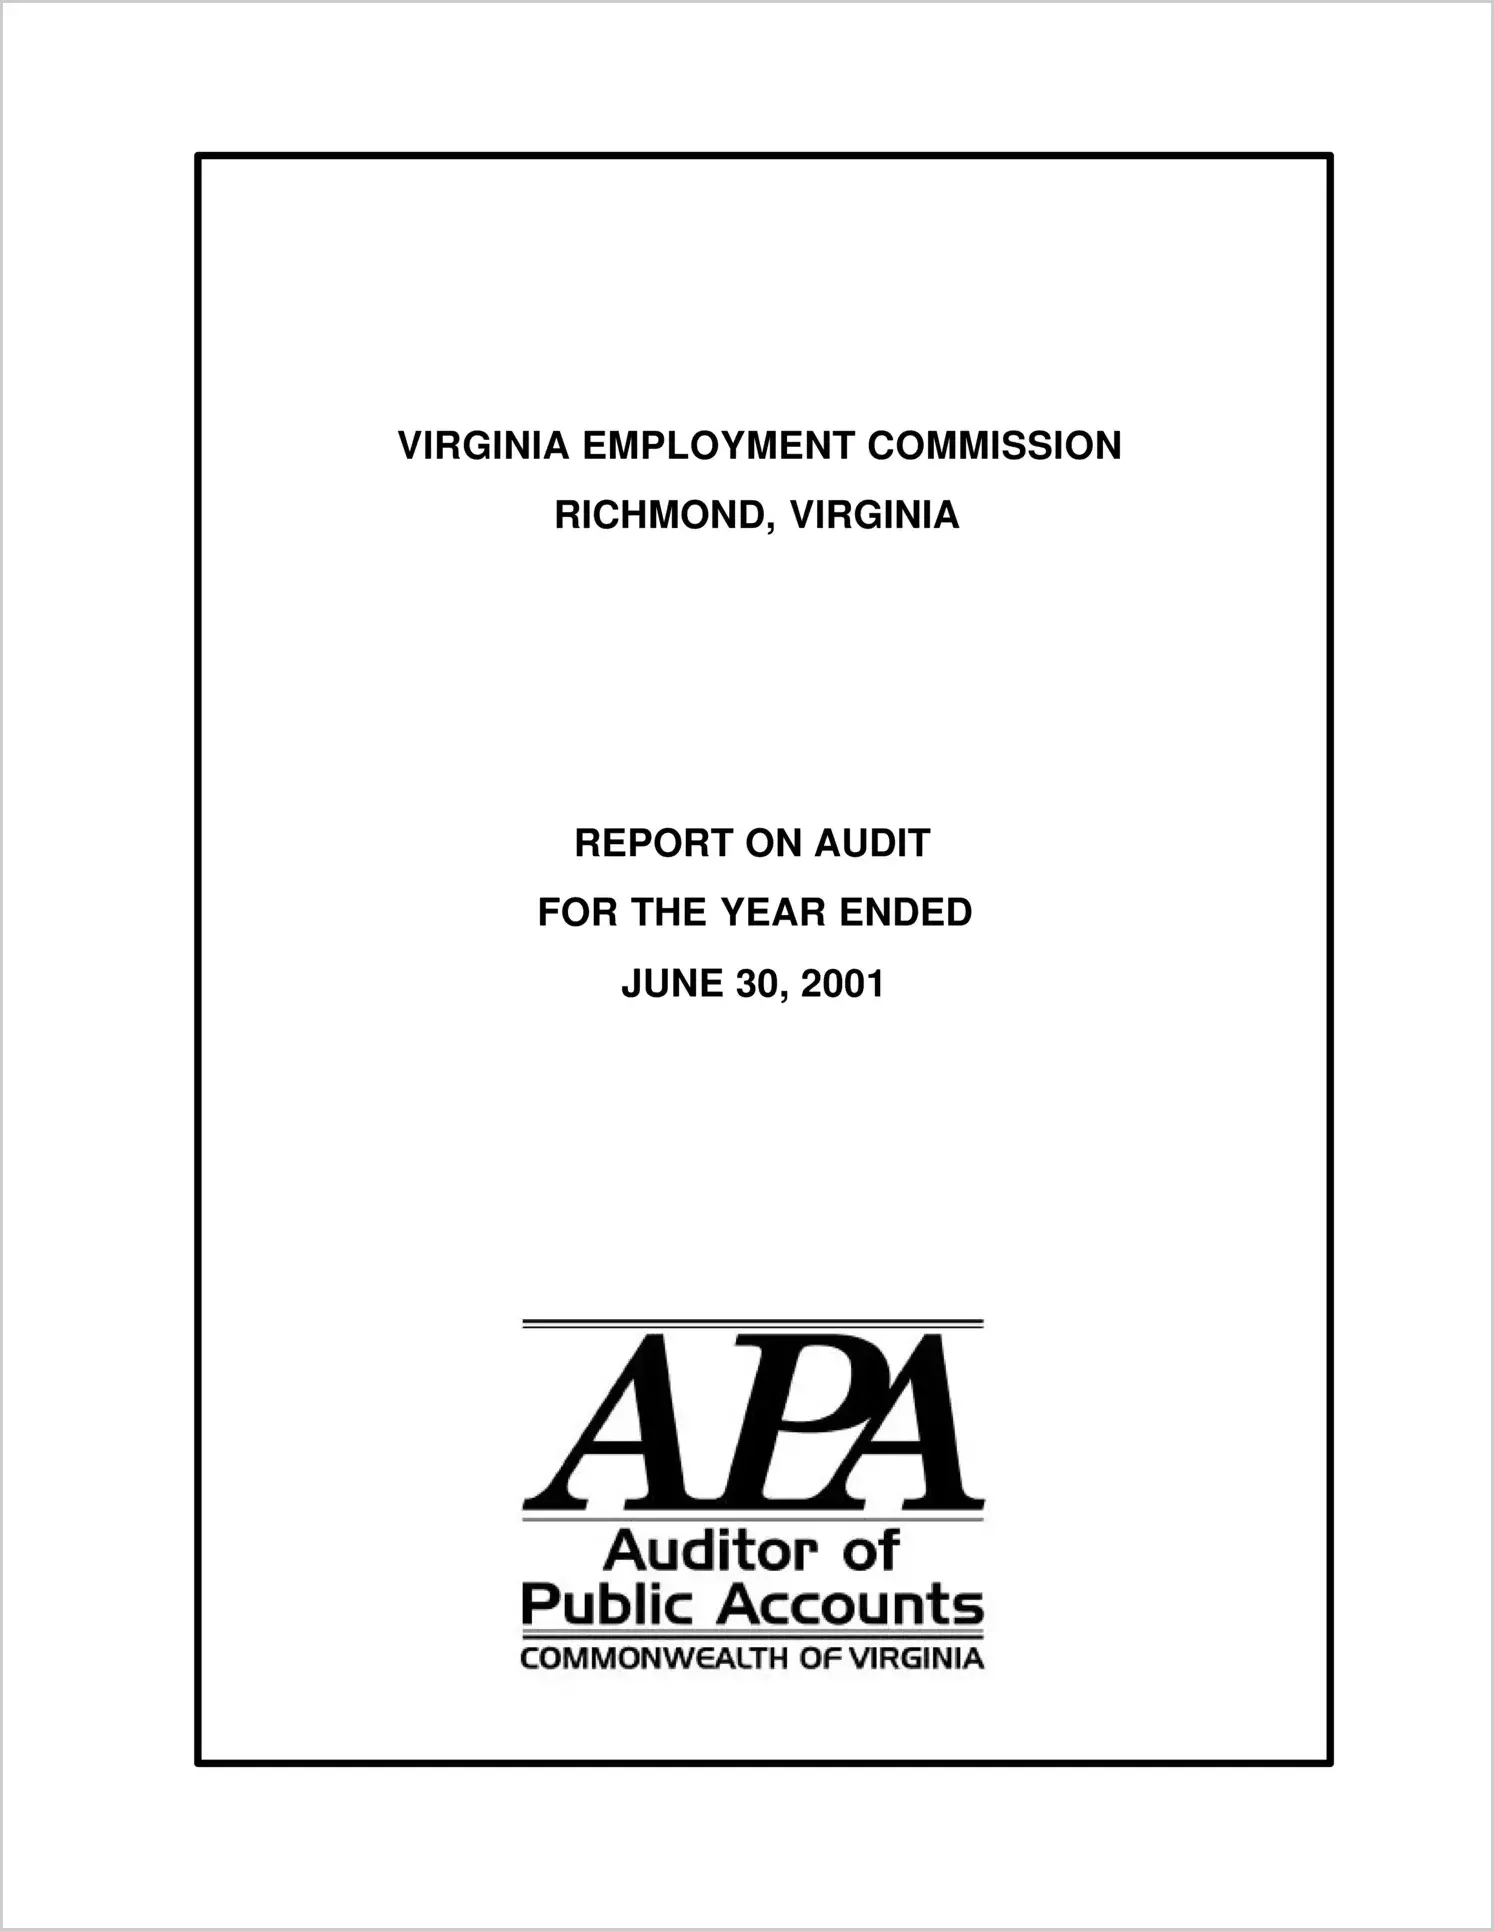 Virginia Employment Commission for the year ended June 30, 2001